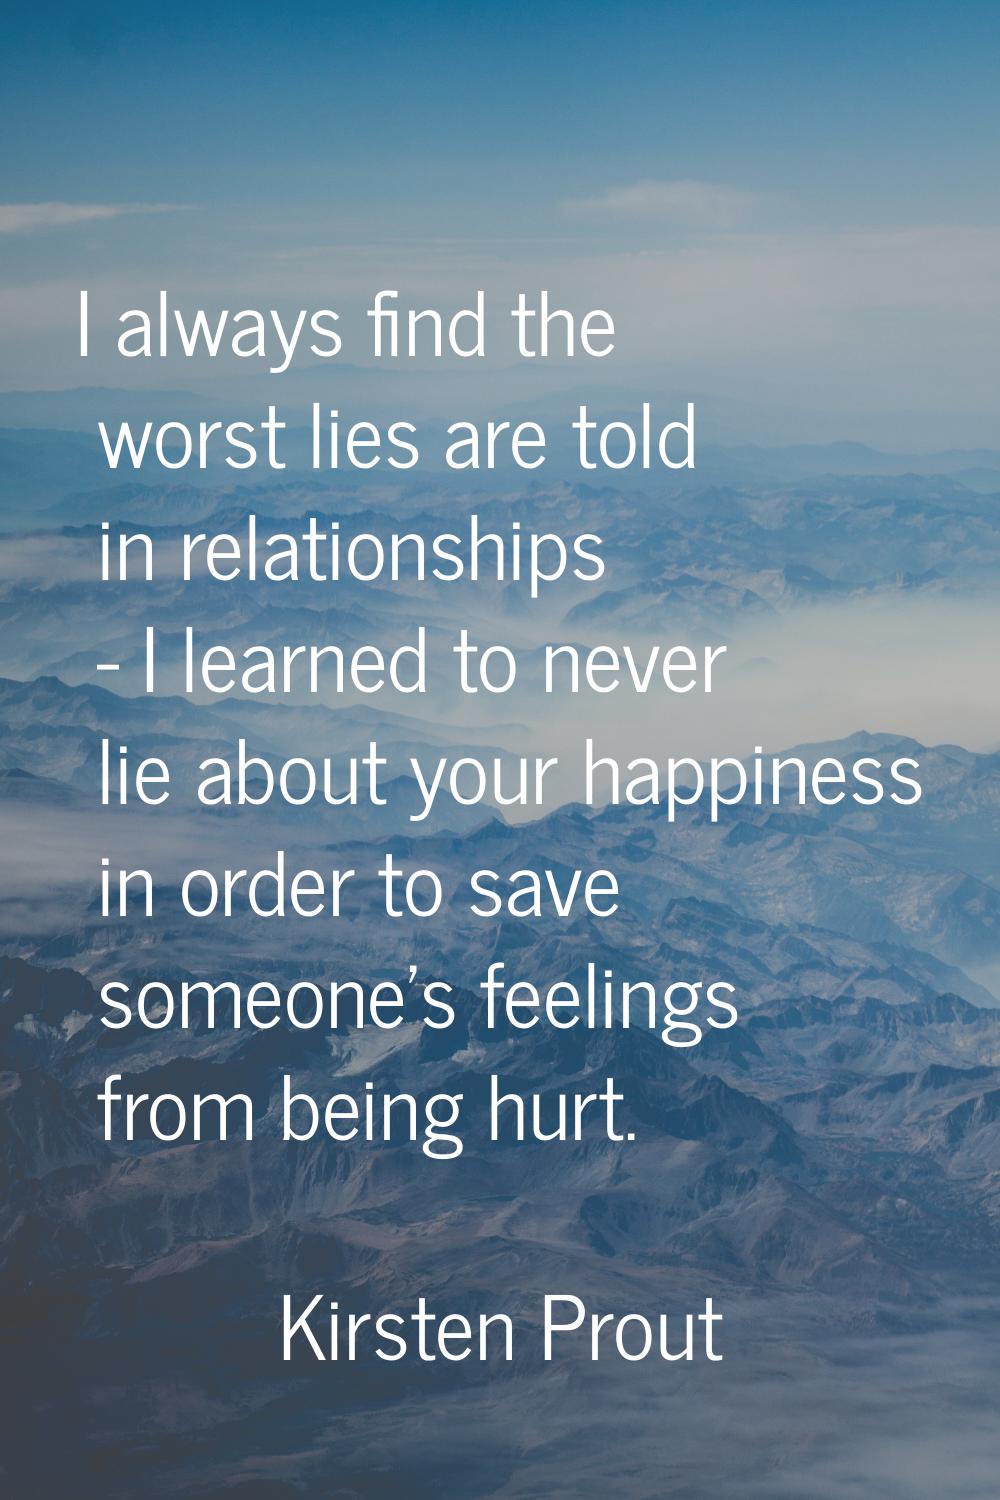 I always find the worst lies are told in relationships - I learned to never lie about your happines